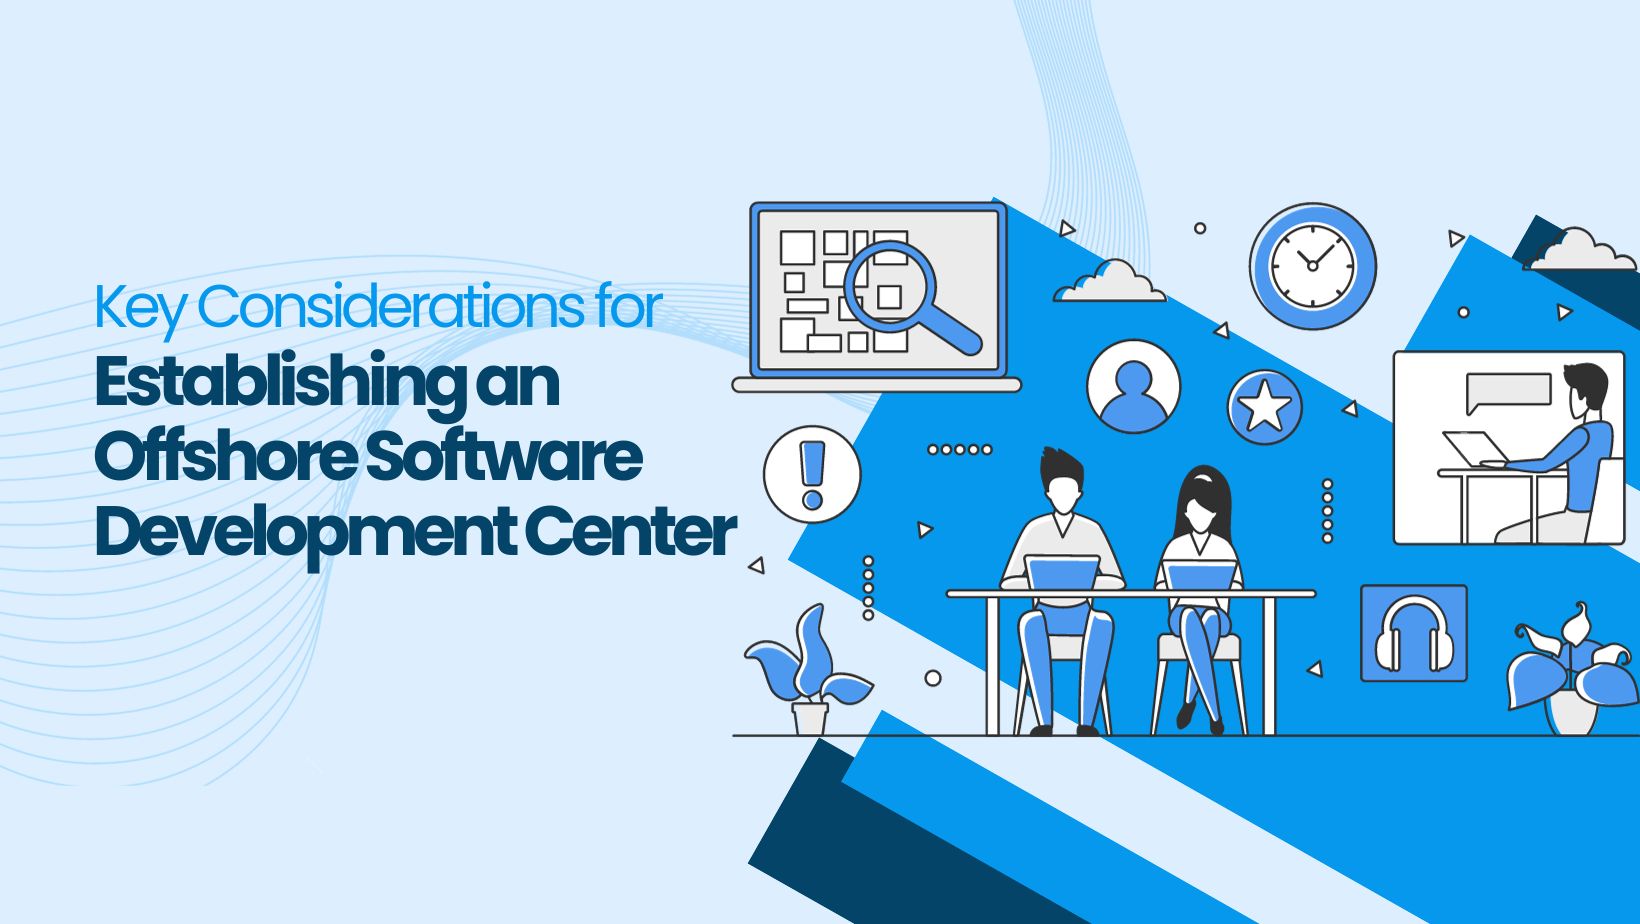 What Are the Key Considerations for Establishing an Offshore Software Development Center